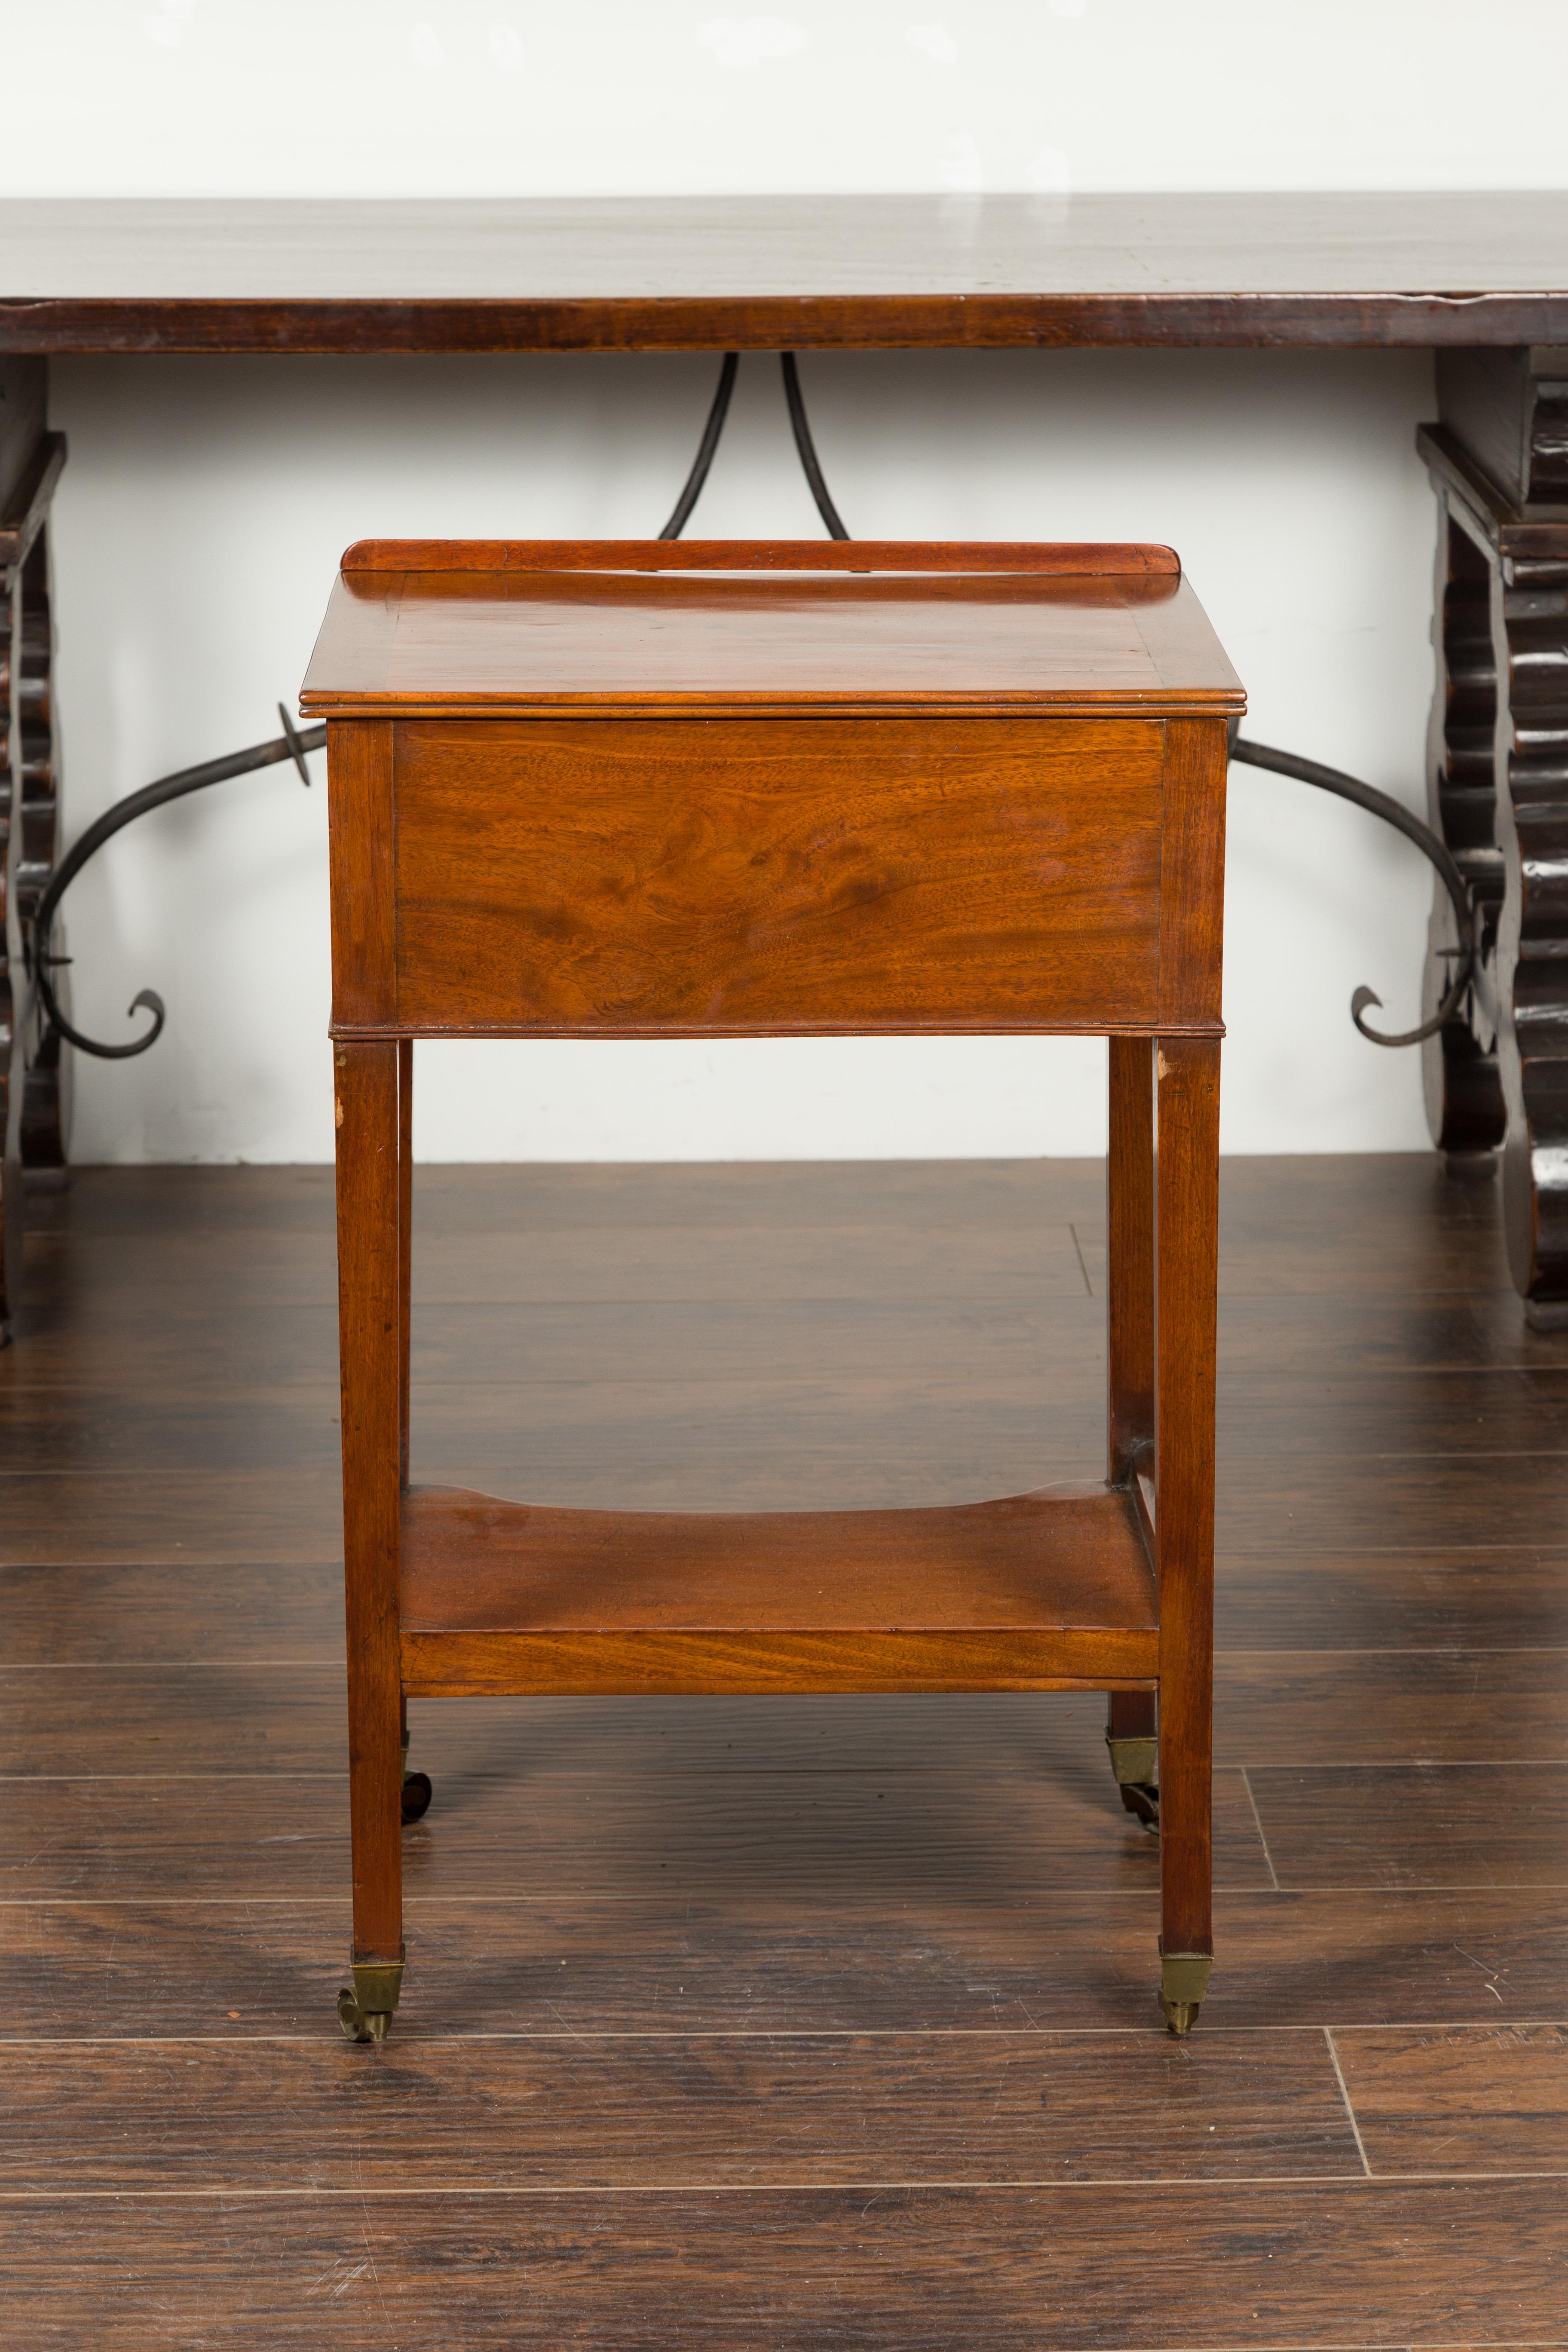 English 1820s Mahogany Architect's Table with Tilt Top, Single Drawer and Shelf 7